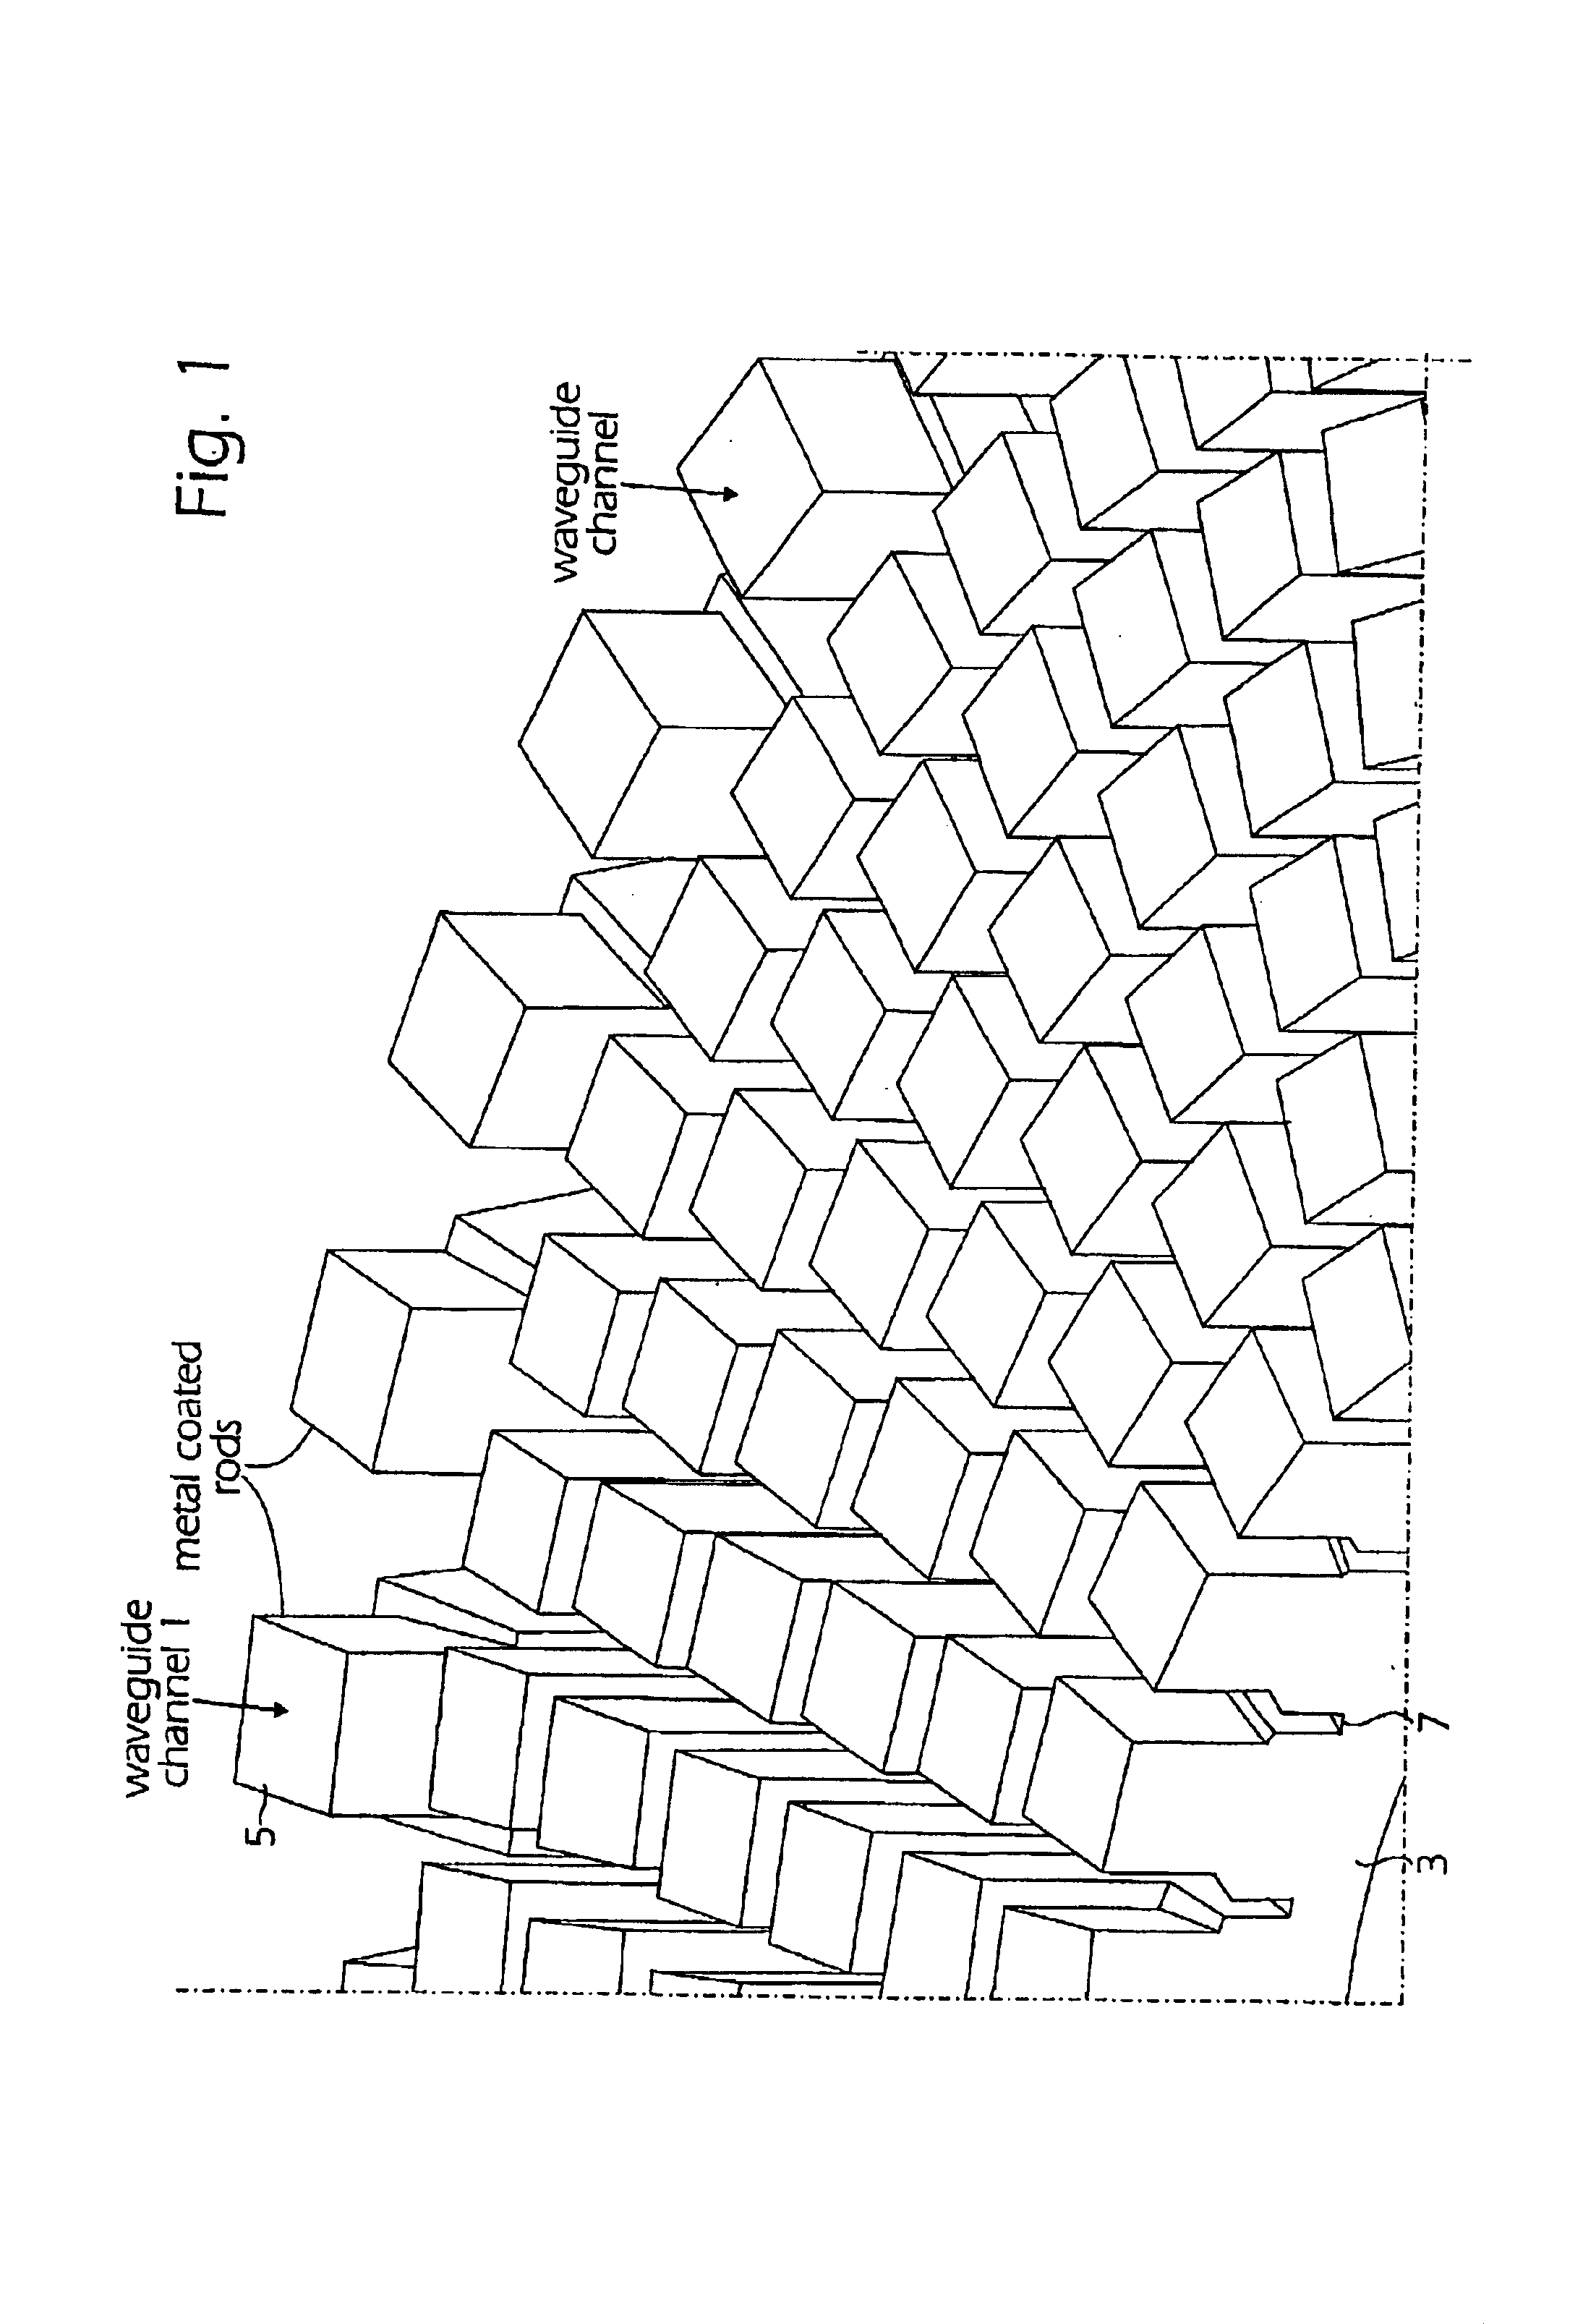 Method of fabricating waveguide channels